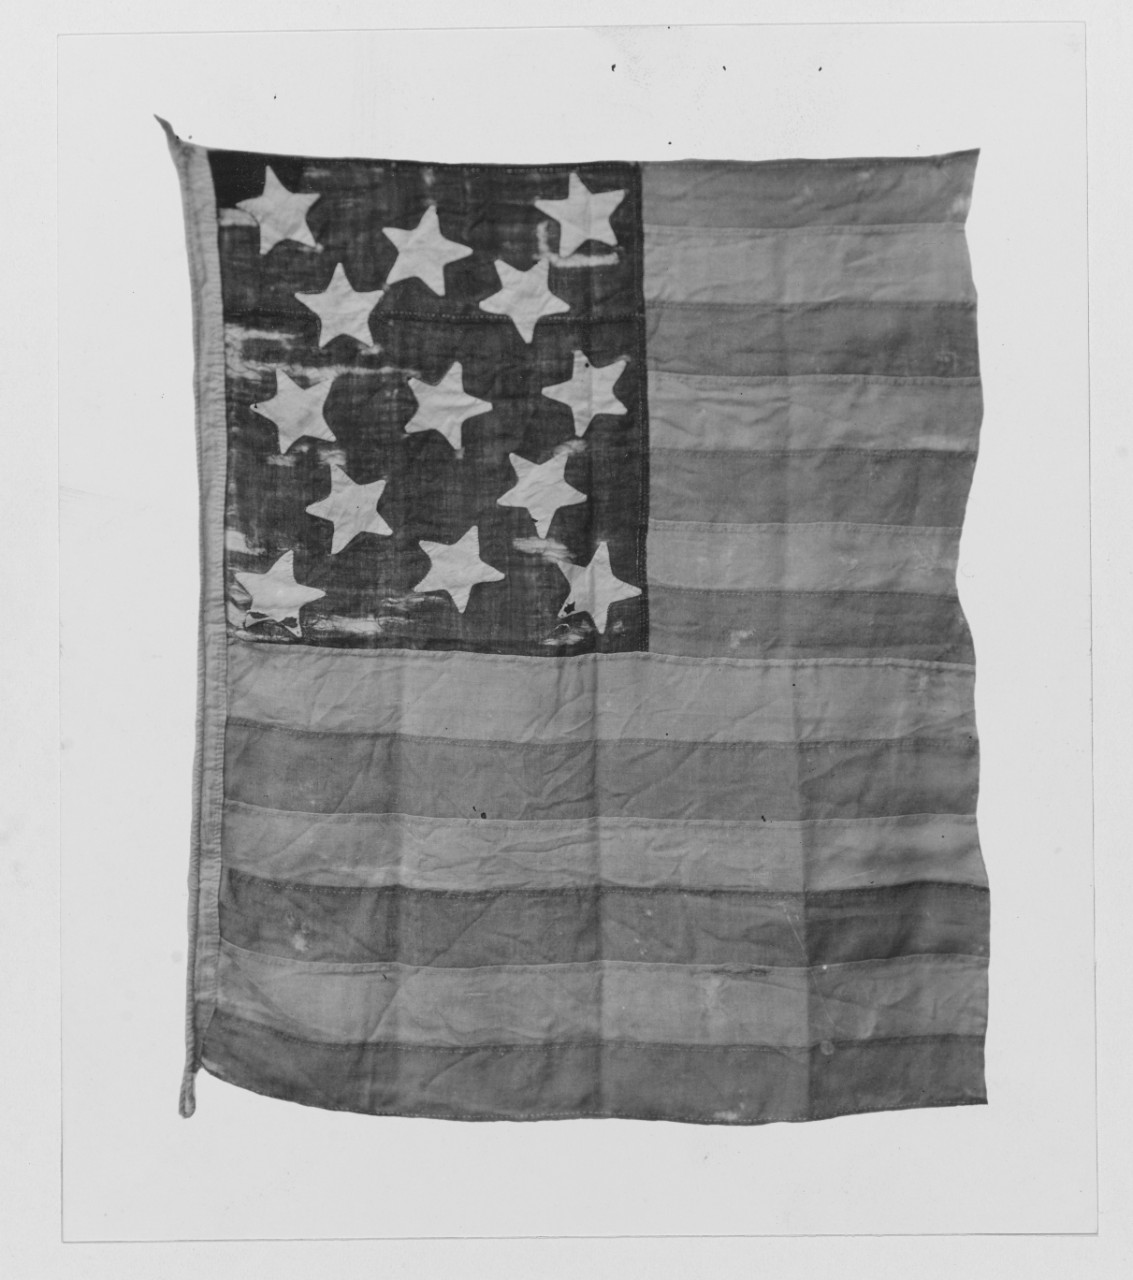 Remmant of Flag from U.S. FRIGATE CONSTITUTION